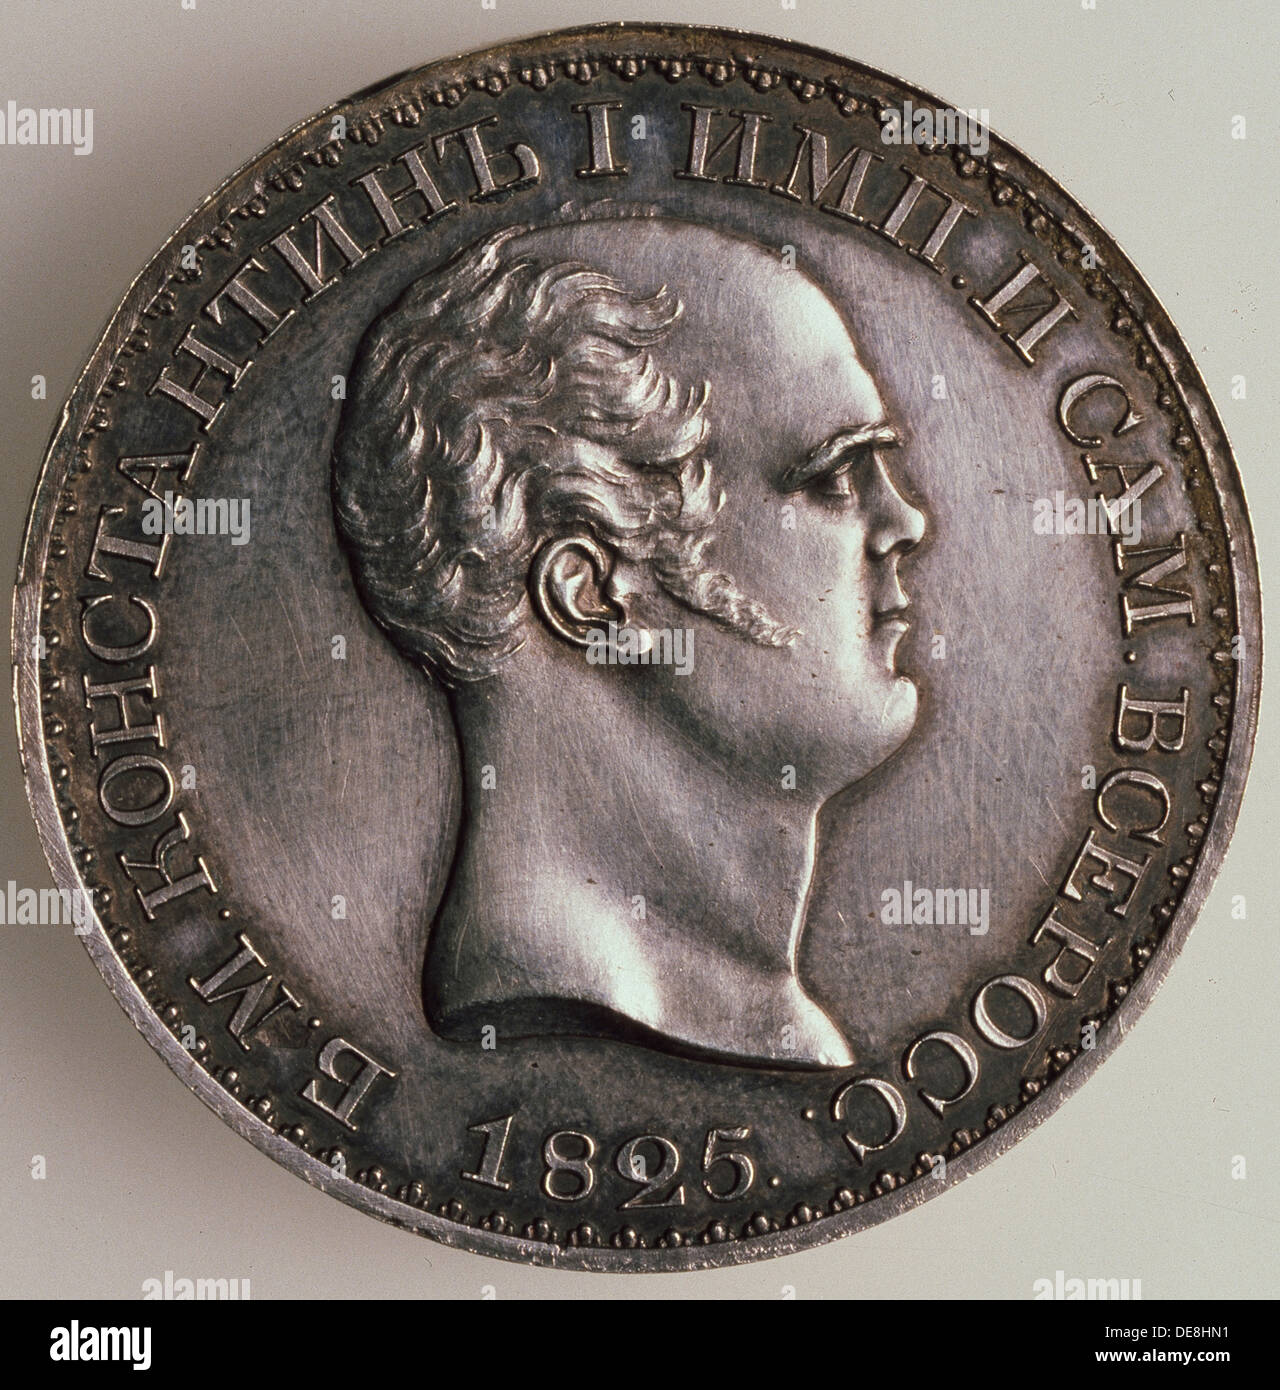 The Rubel of Constantine (Averse: Portrait of Constantine), 1825. Artist: Numismatic, Russian coins Stock Photo